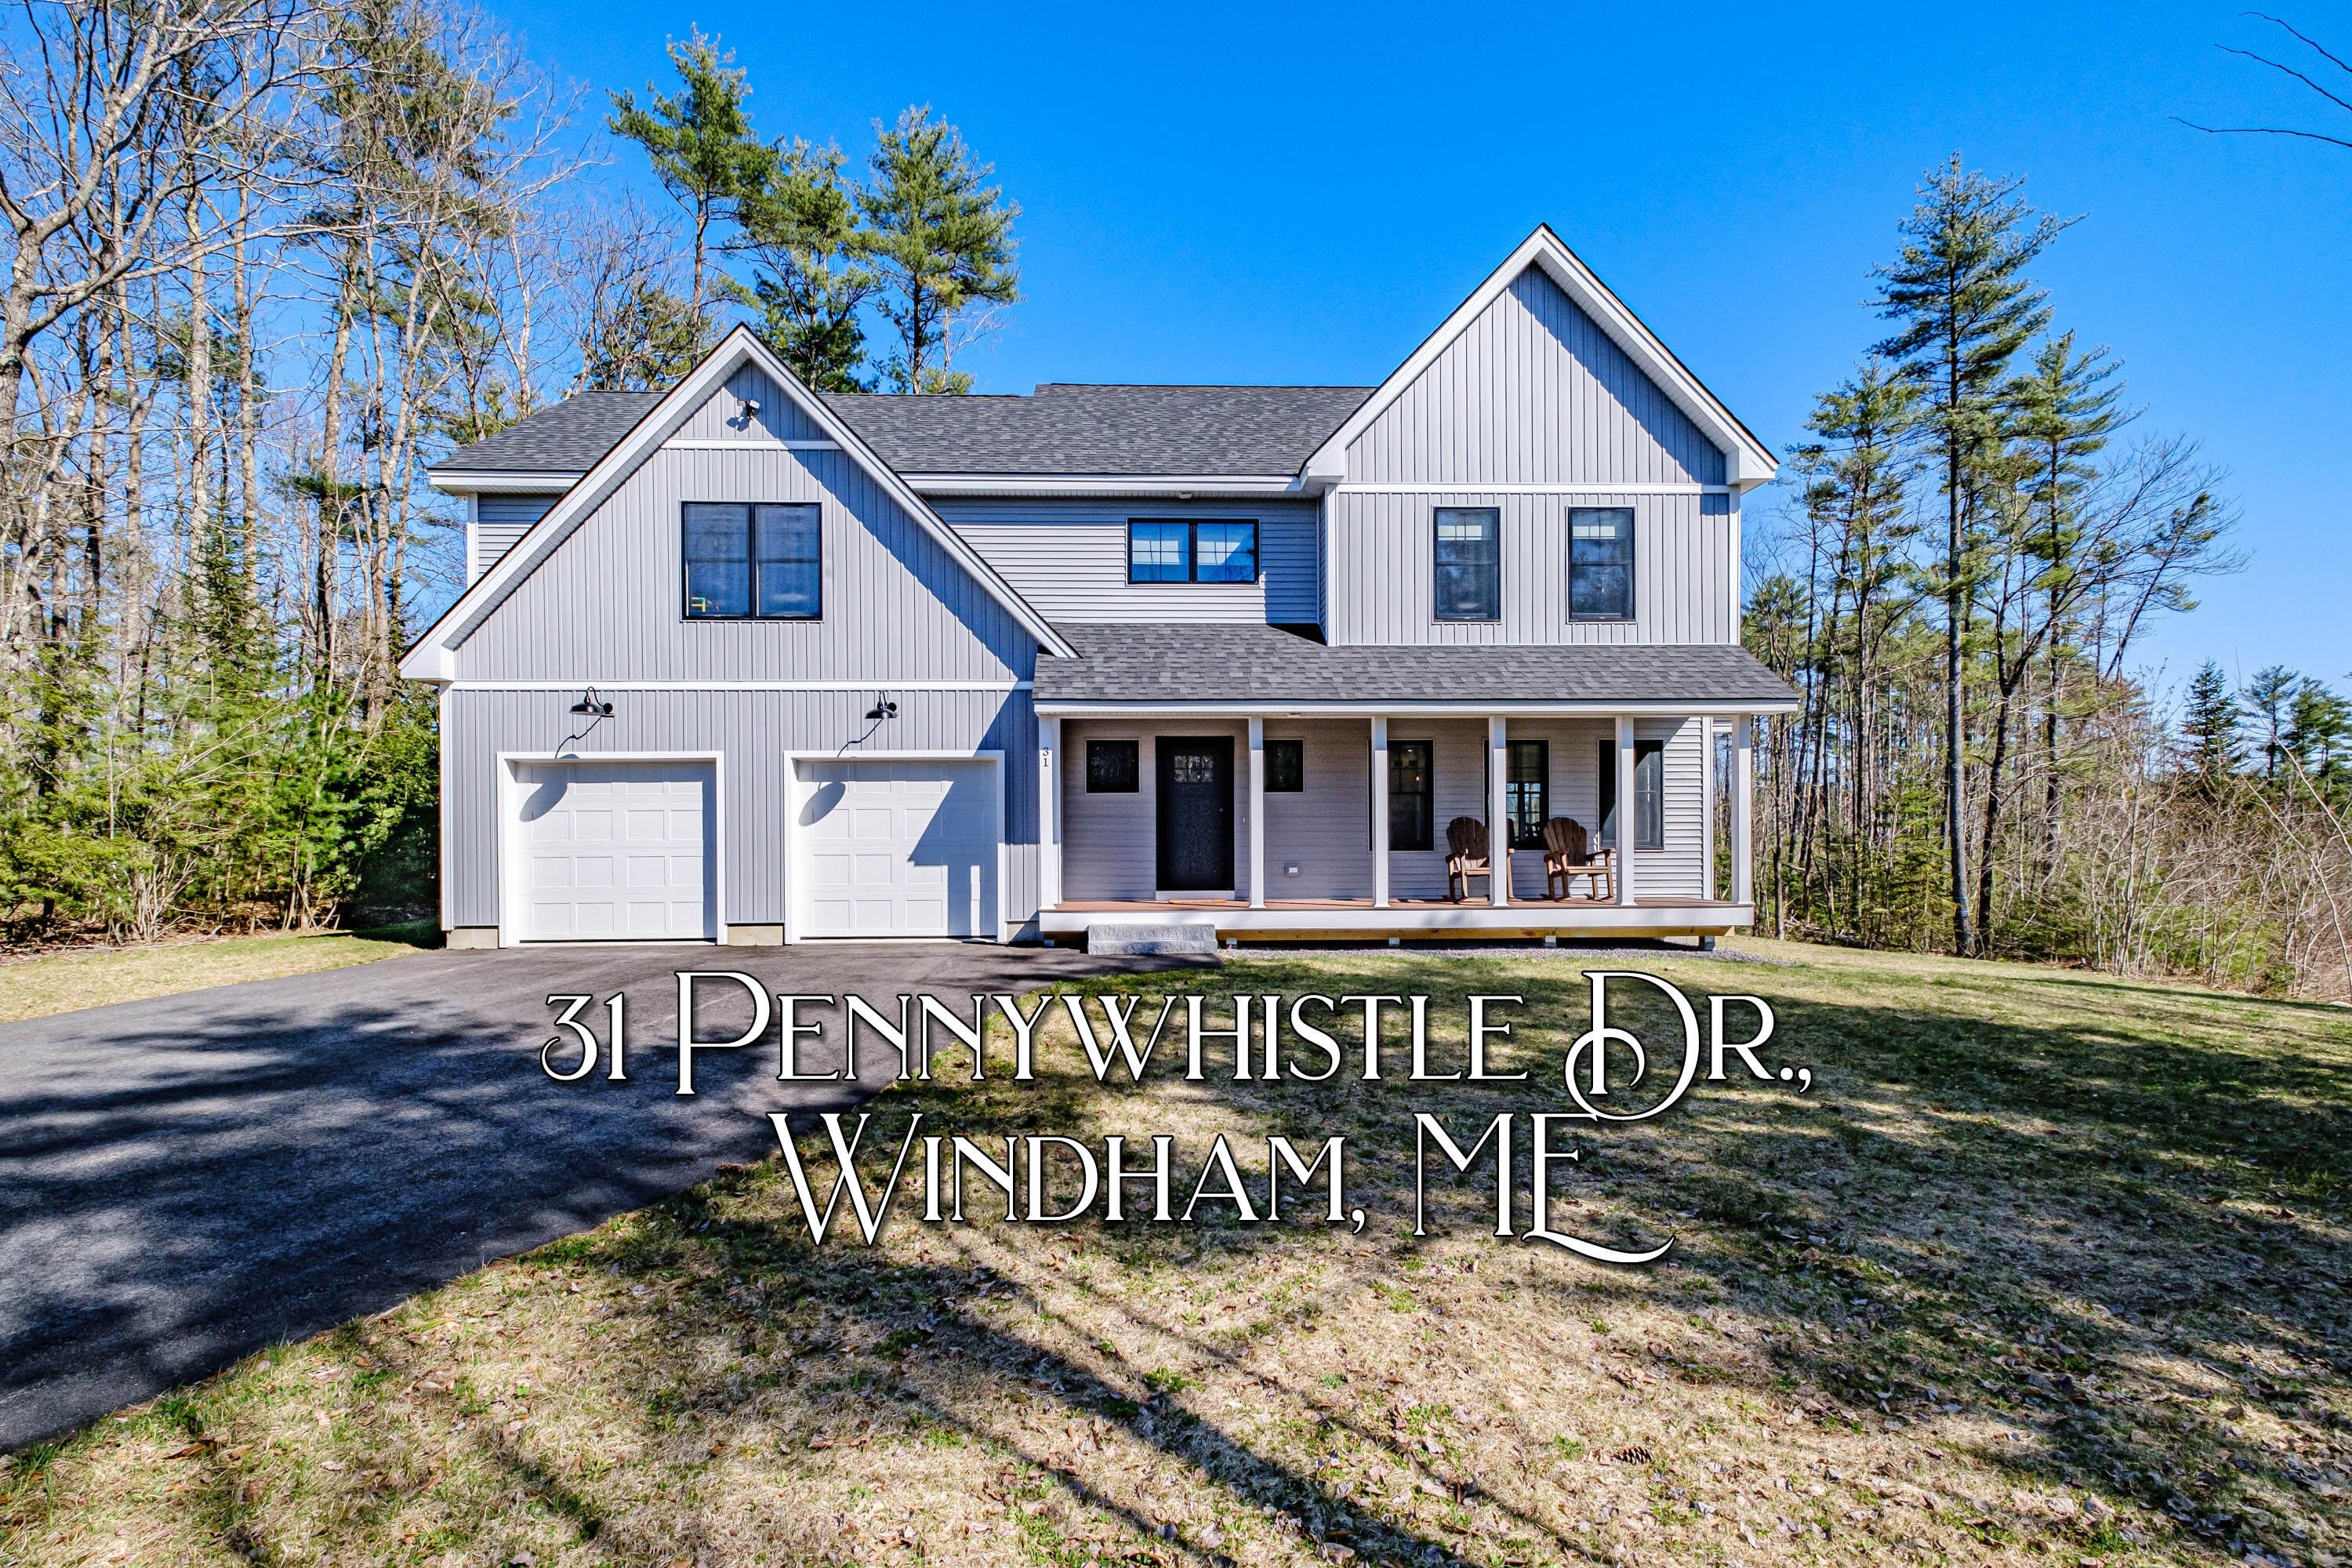 1. 31 Pennywhistle Drive